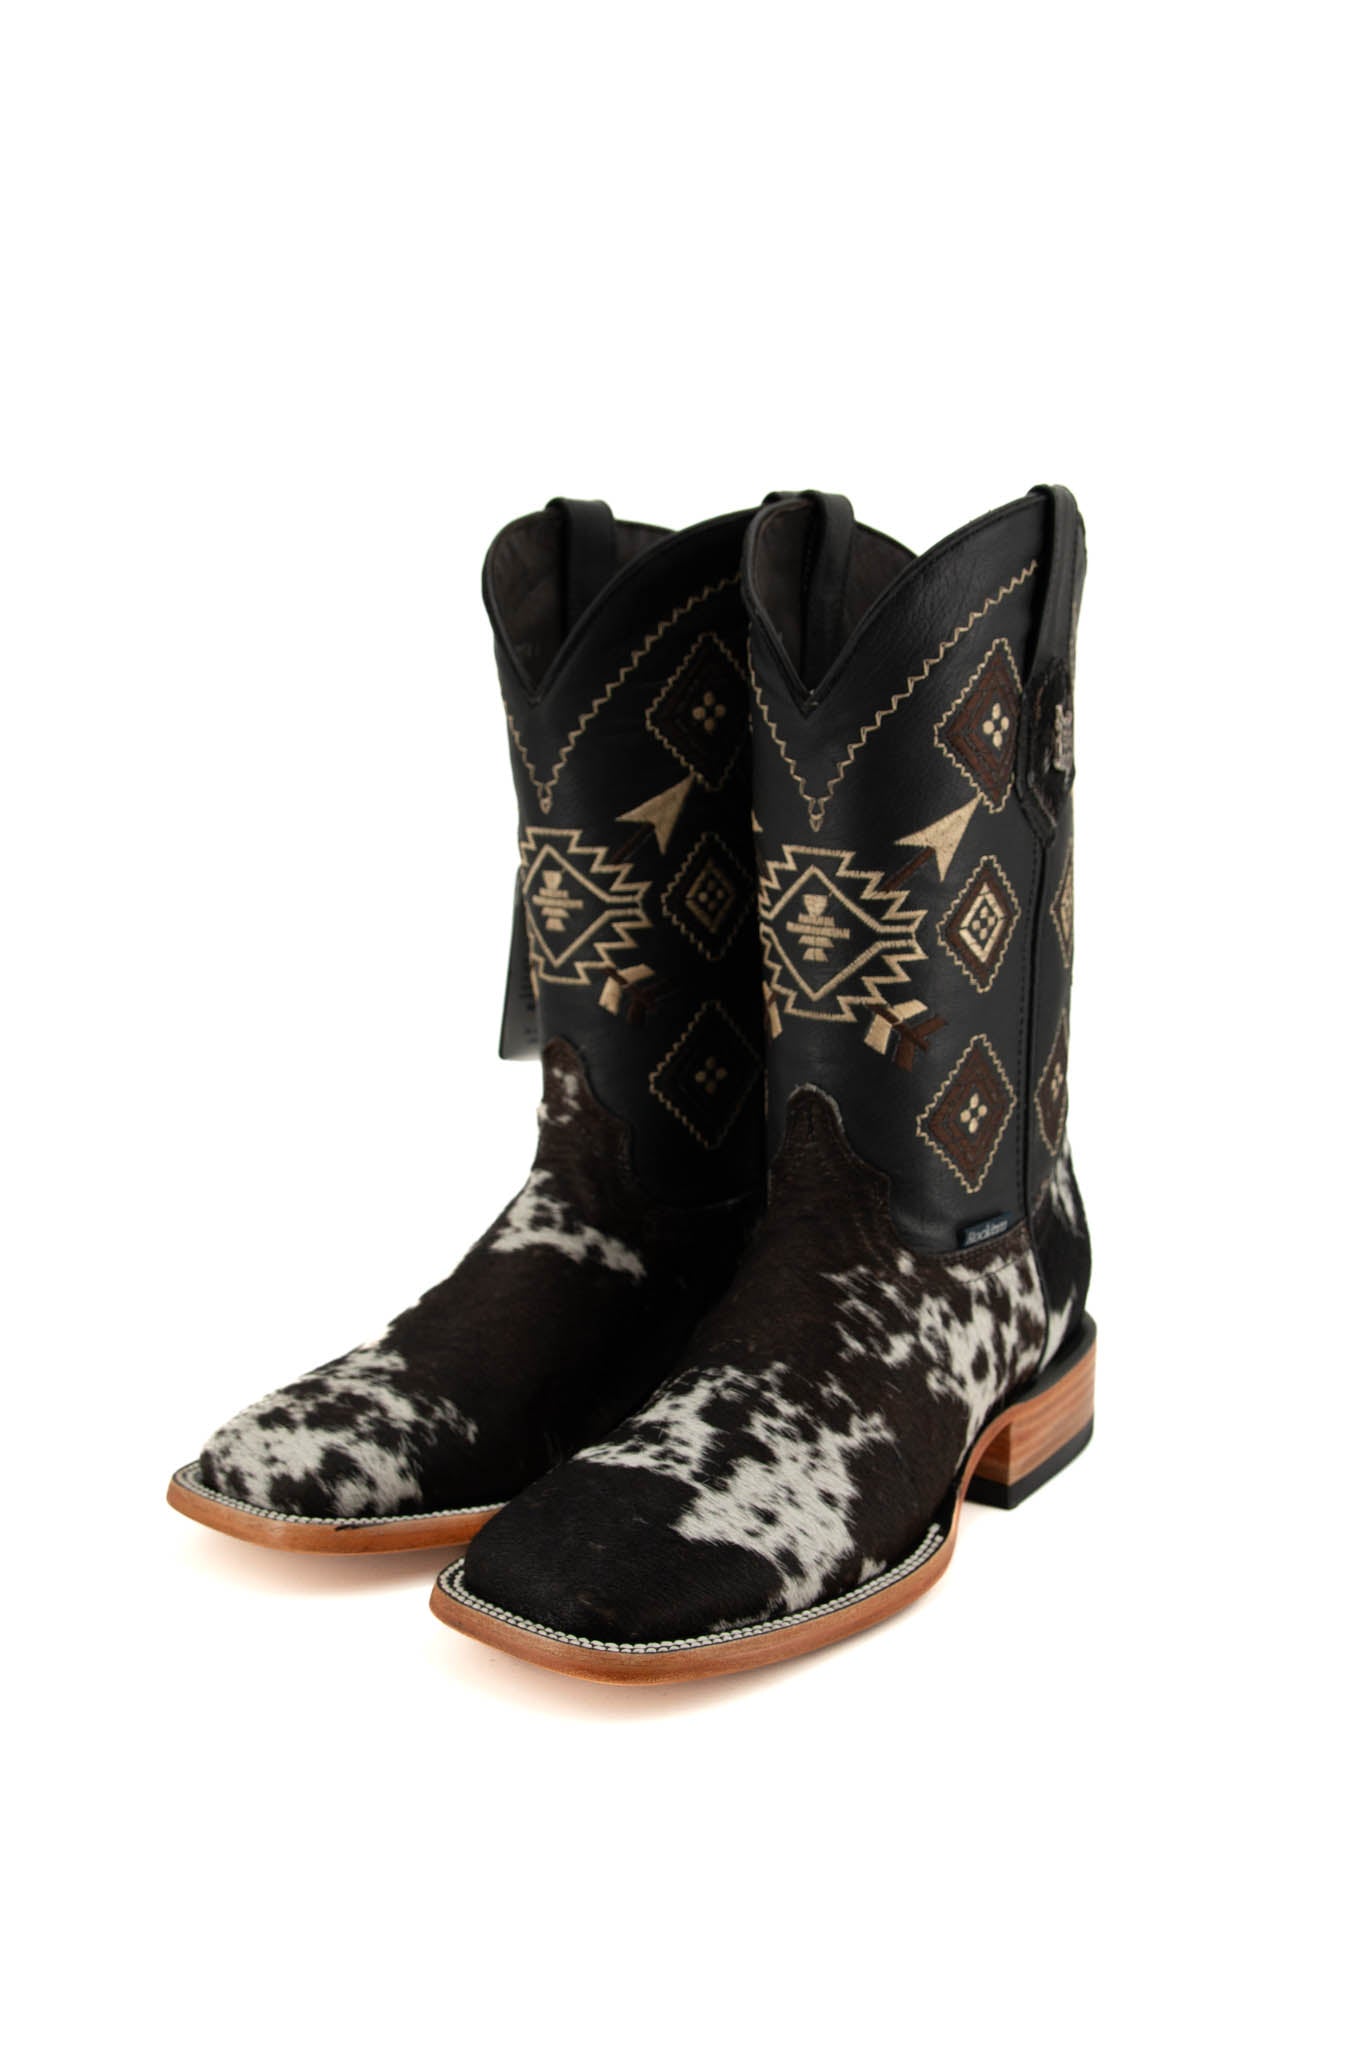 Men's Cowhide Boots Size 6 Box 8F (As Seen On Image)